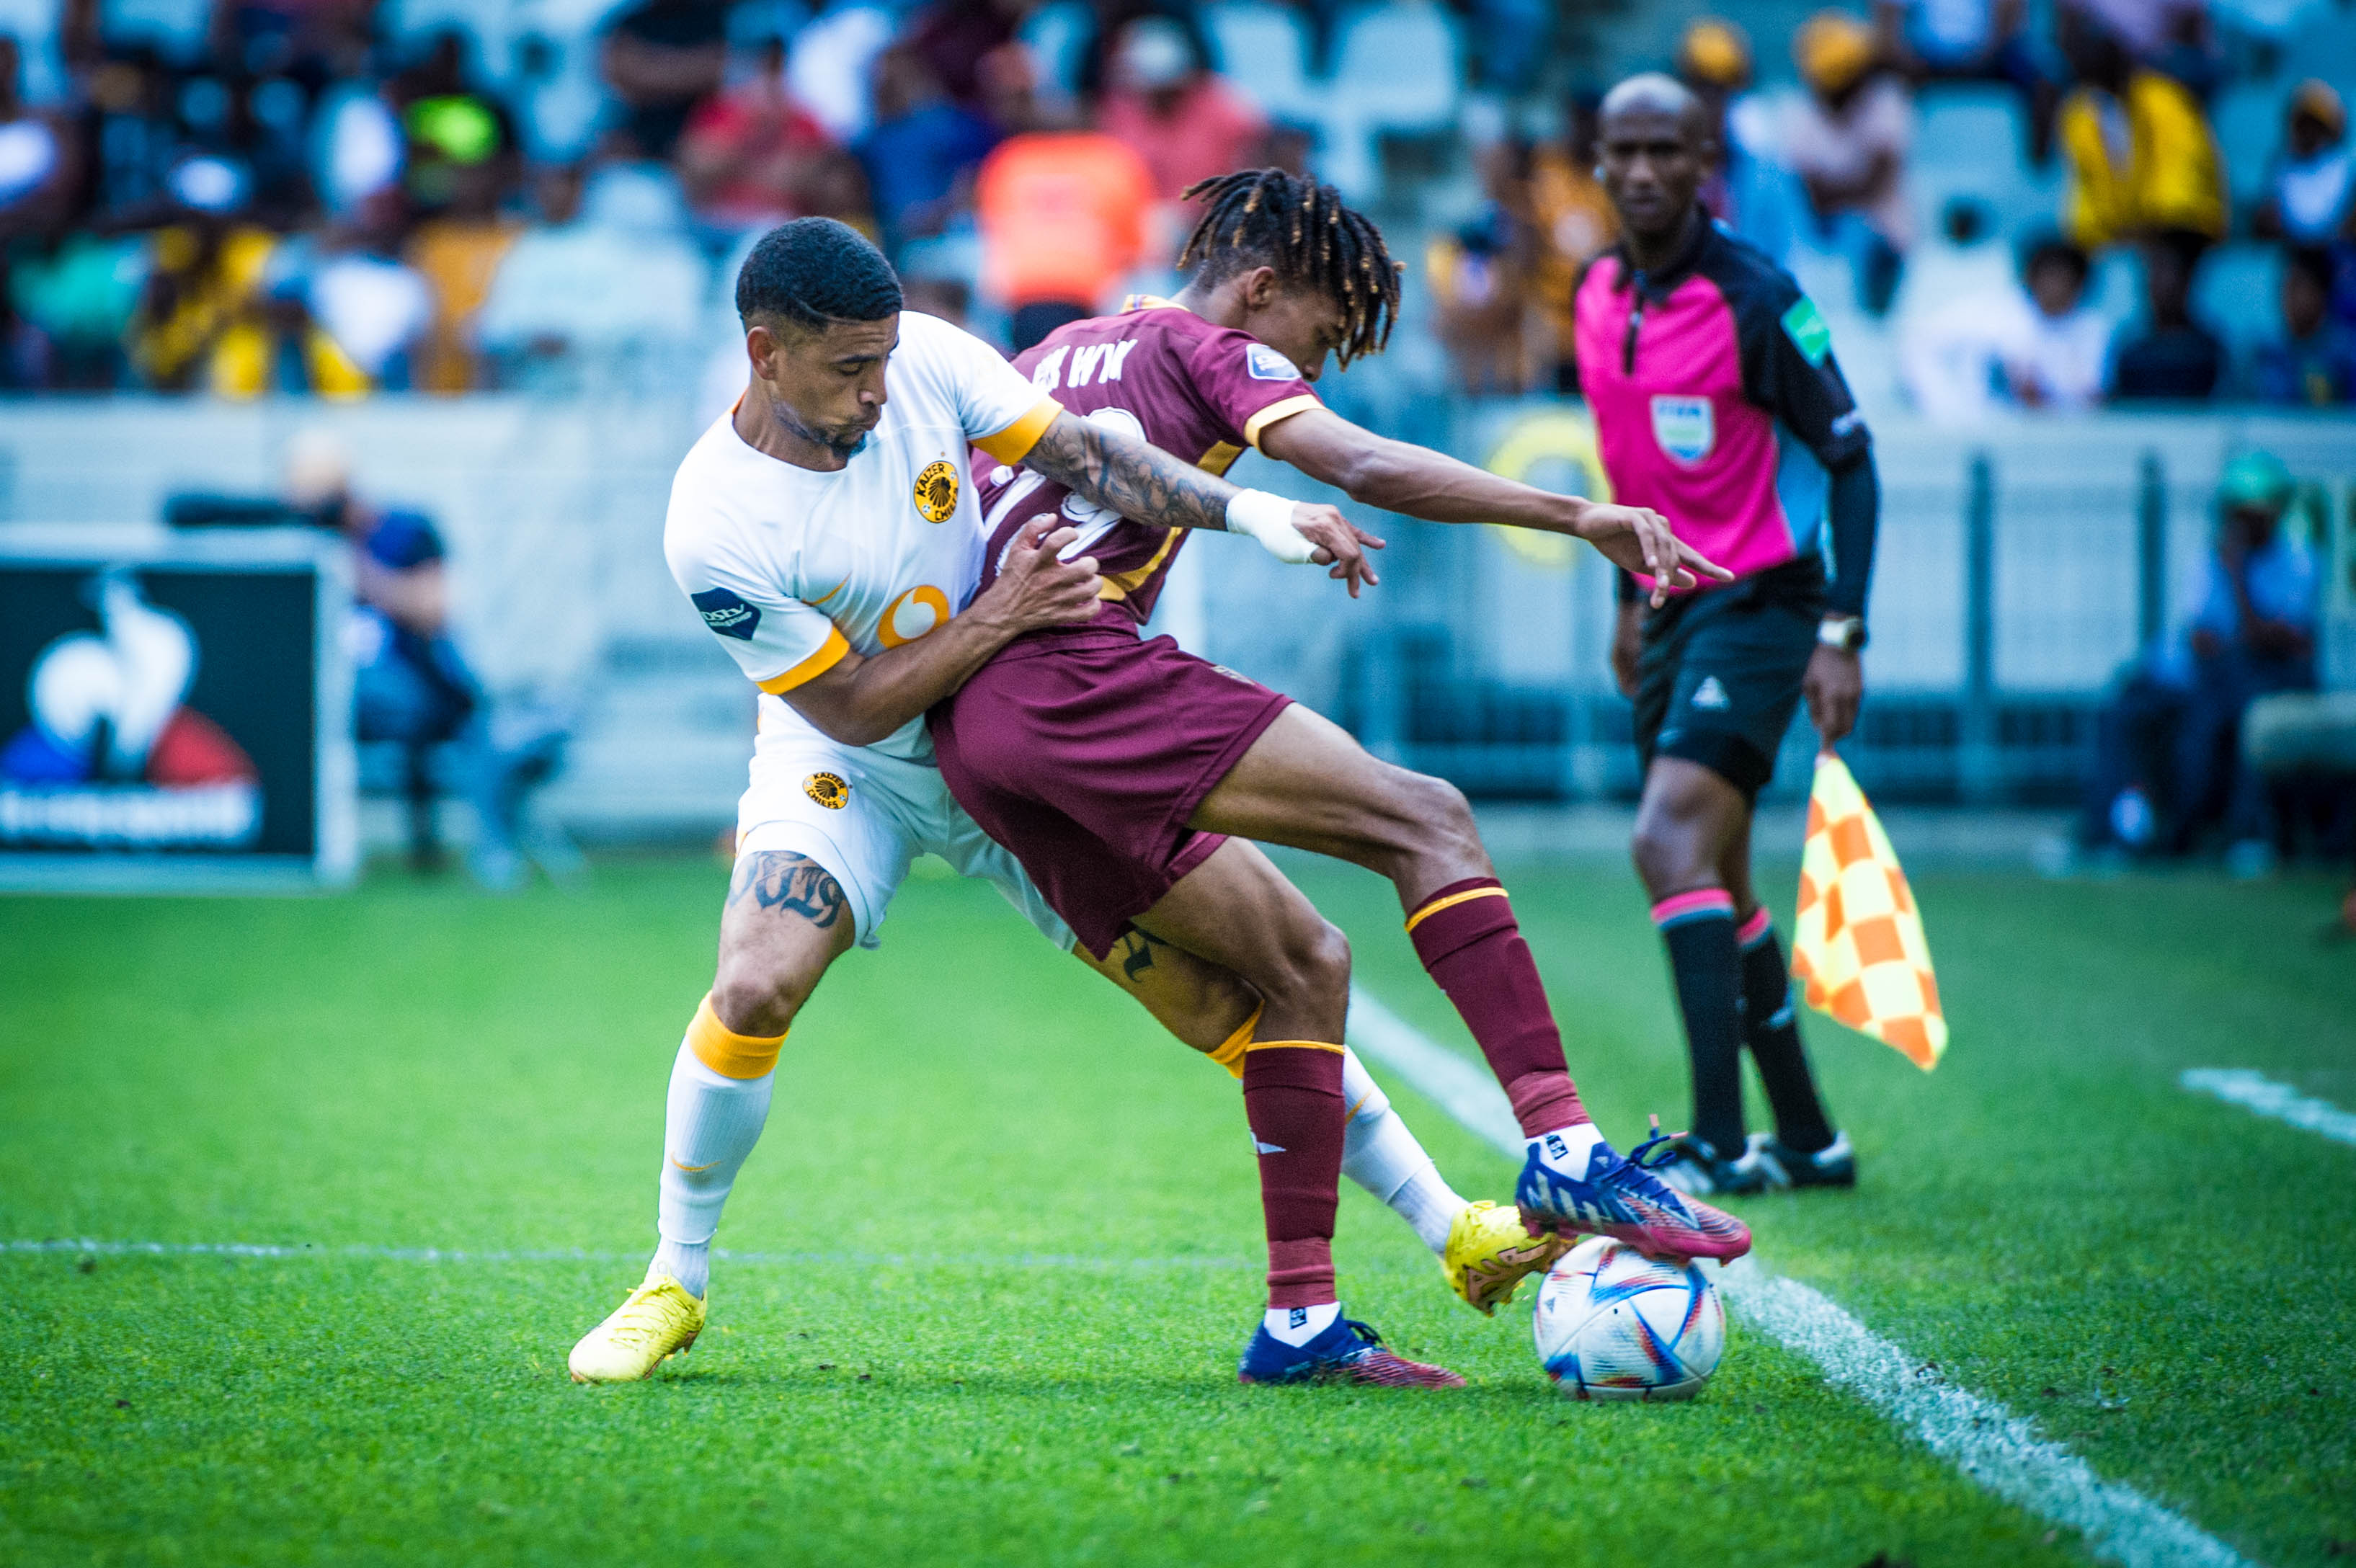 Kaizer Chiefs welcome Stellenbosch to the FNB Stadium for a DStv Premiership clash on Saturday evening